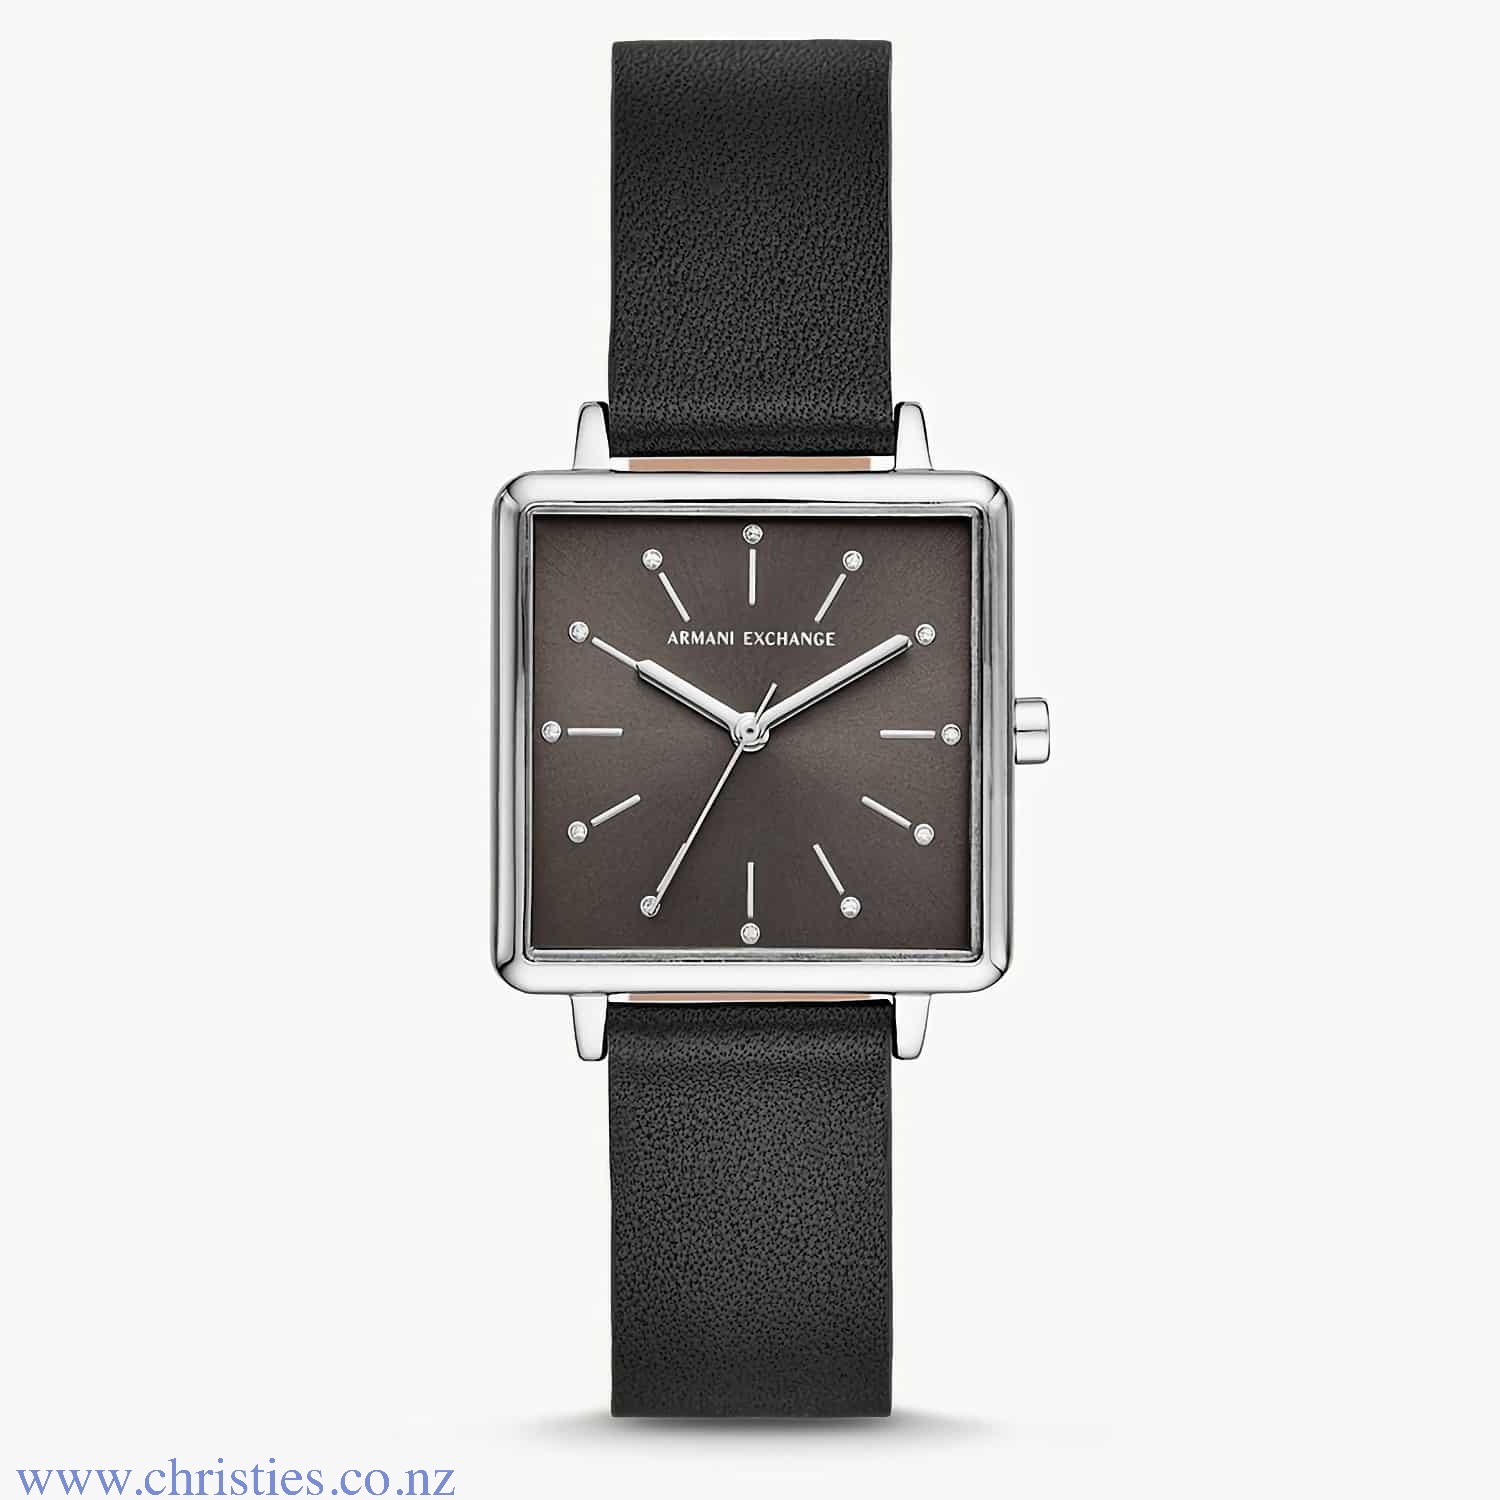 AX5803 A|X  Armani Exchange  Leather Strap Watch. AX5803 A|X  Armani Exchange  Leather Strap Watch  LAYBUY - Pay it easy, in 6 weekly payments and have it now. Only pay the price of your purchase, when you pay your instalments on time. A late fee may @chr